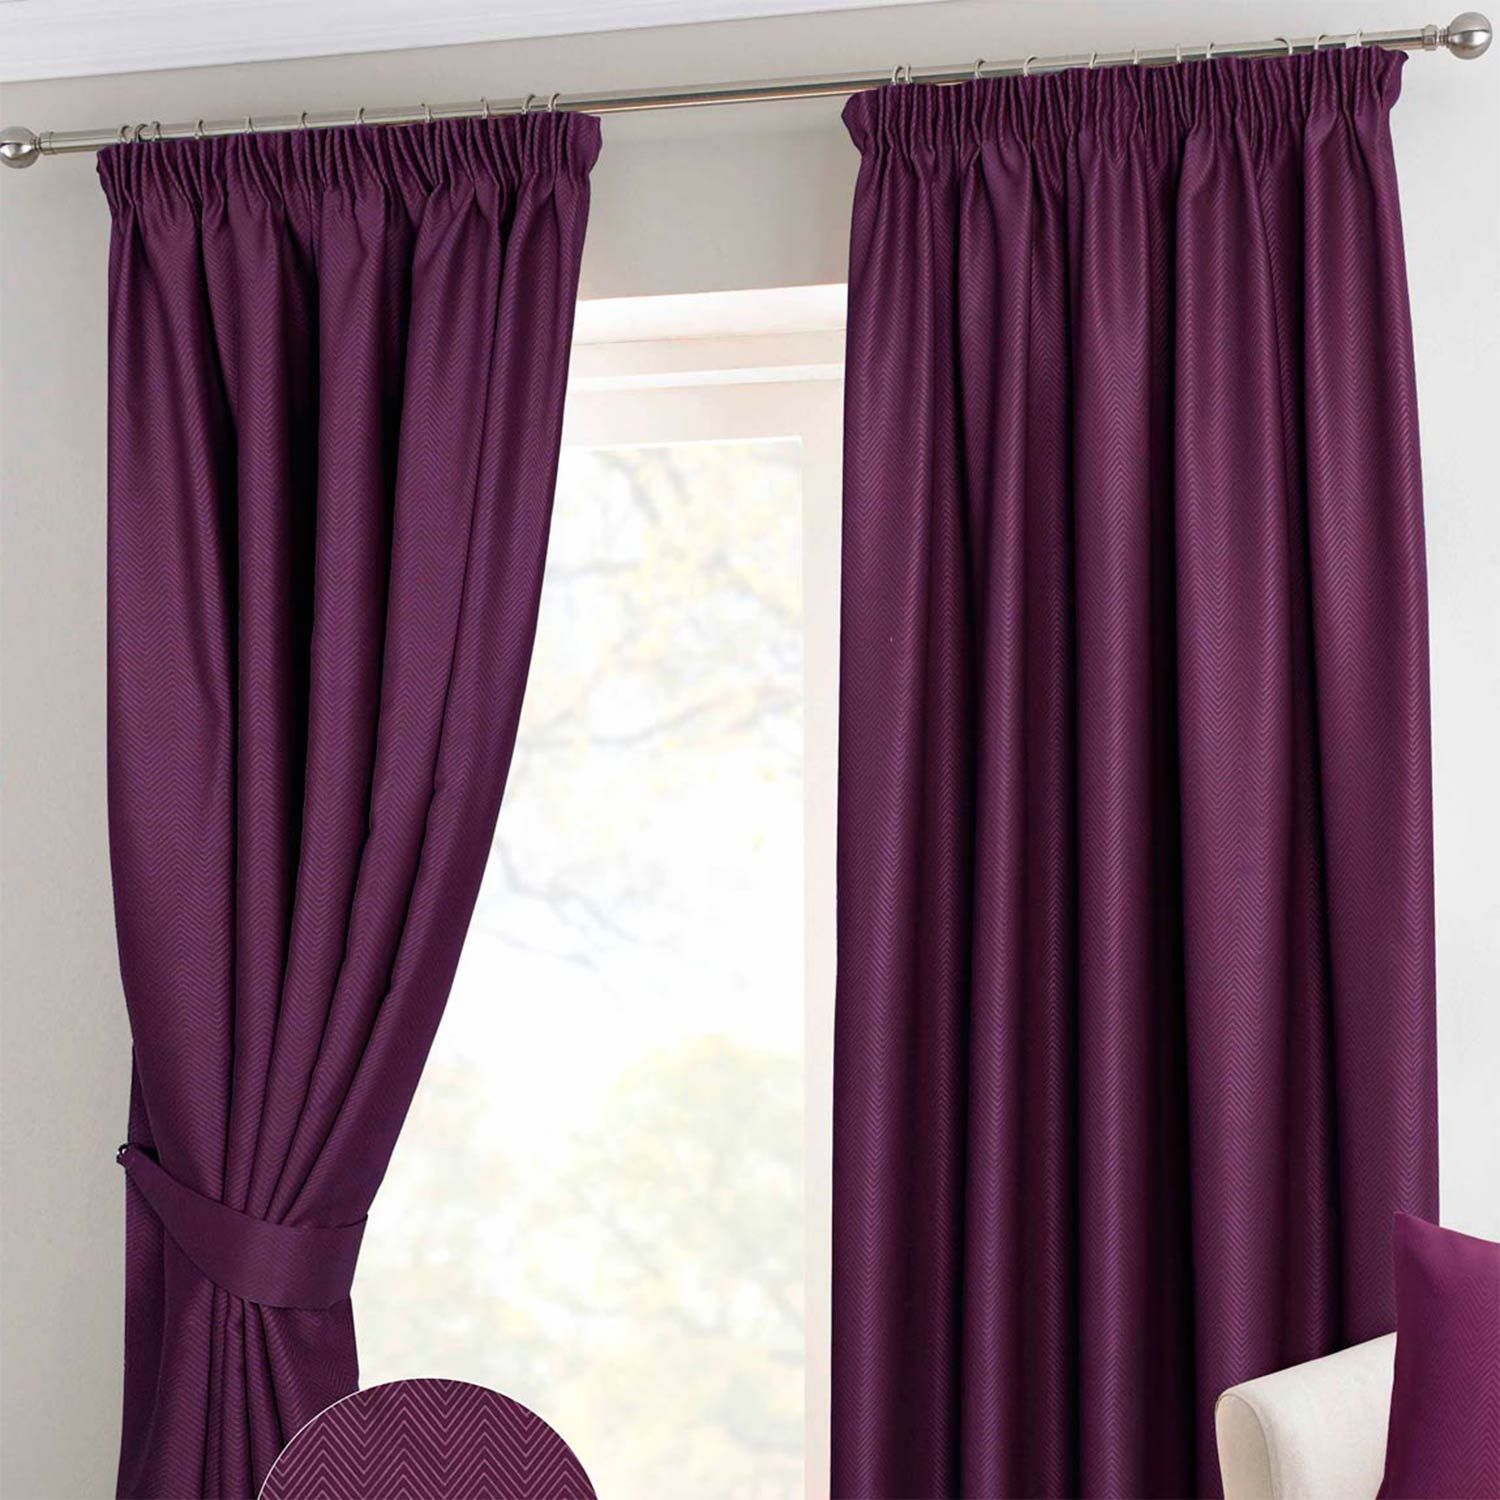 Black Our Curtains Throughout Star Punch Tulle Overlay Blackout Curtain Panel Pairs (View 20 of 30)